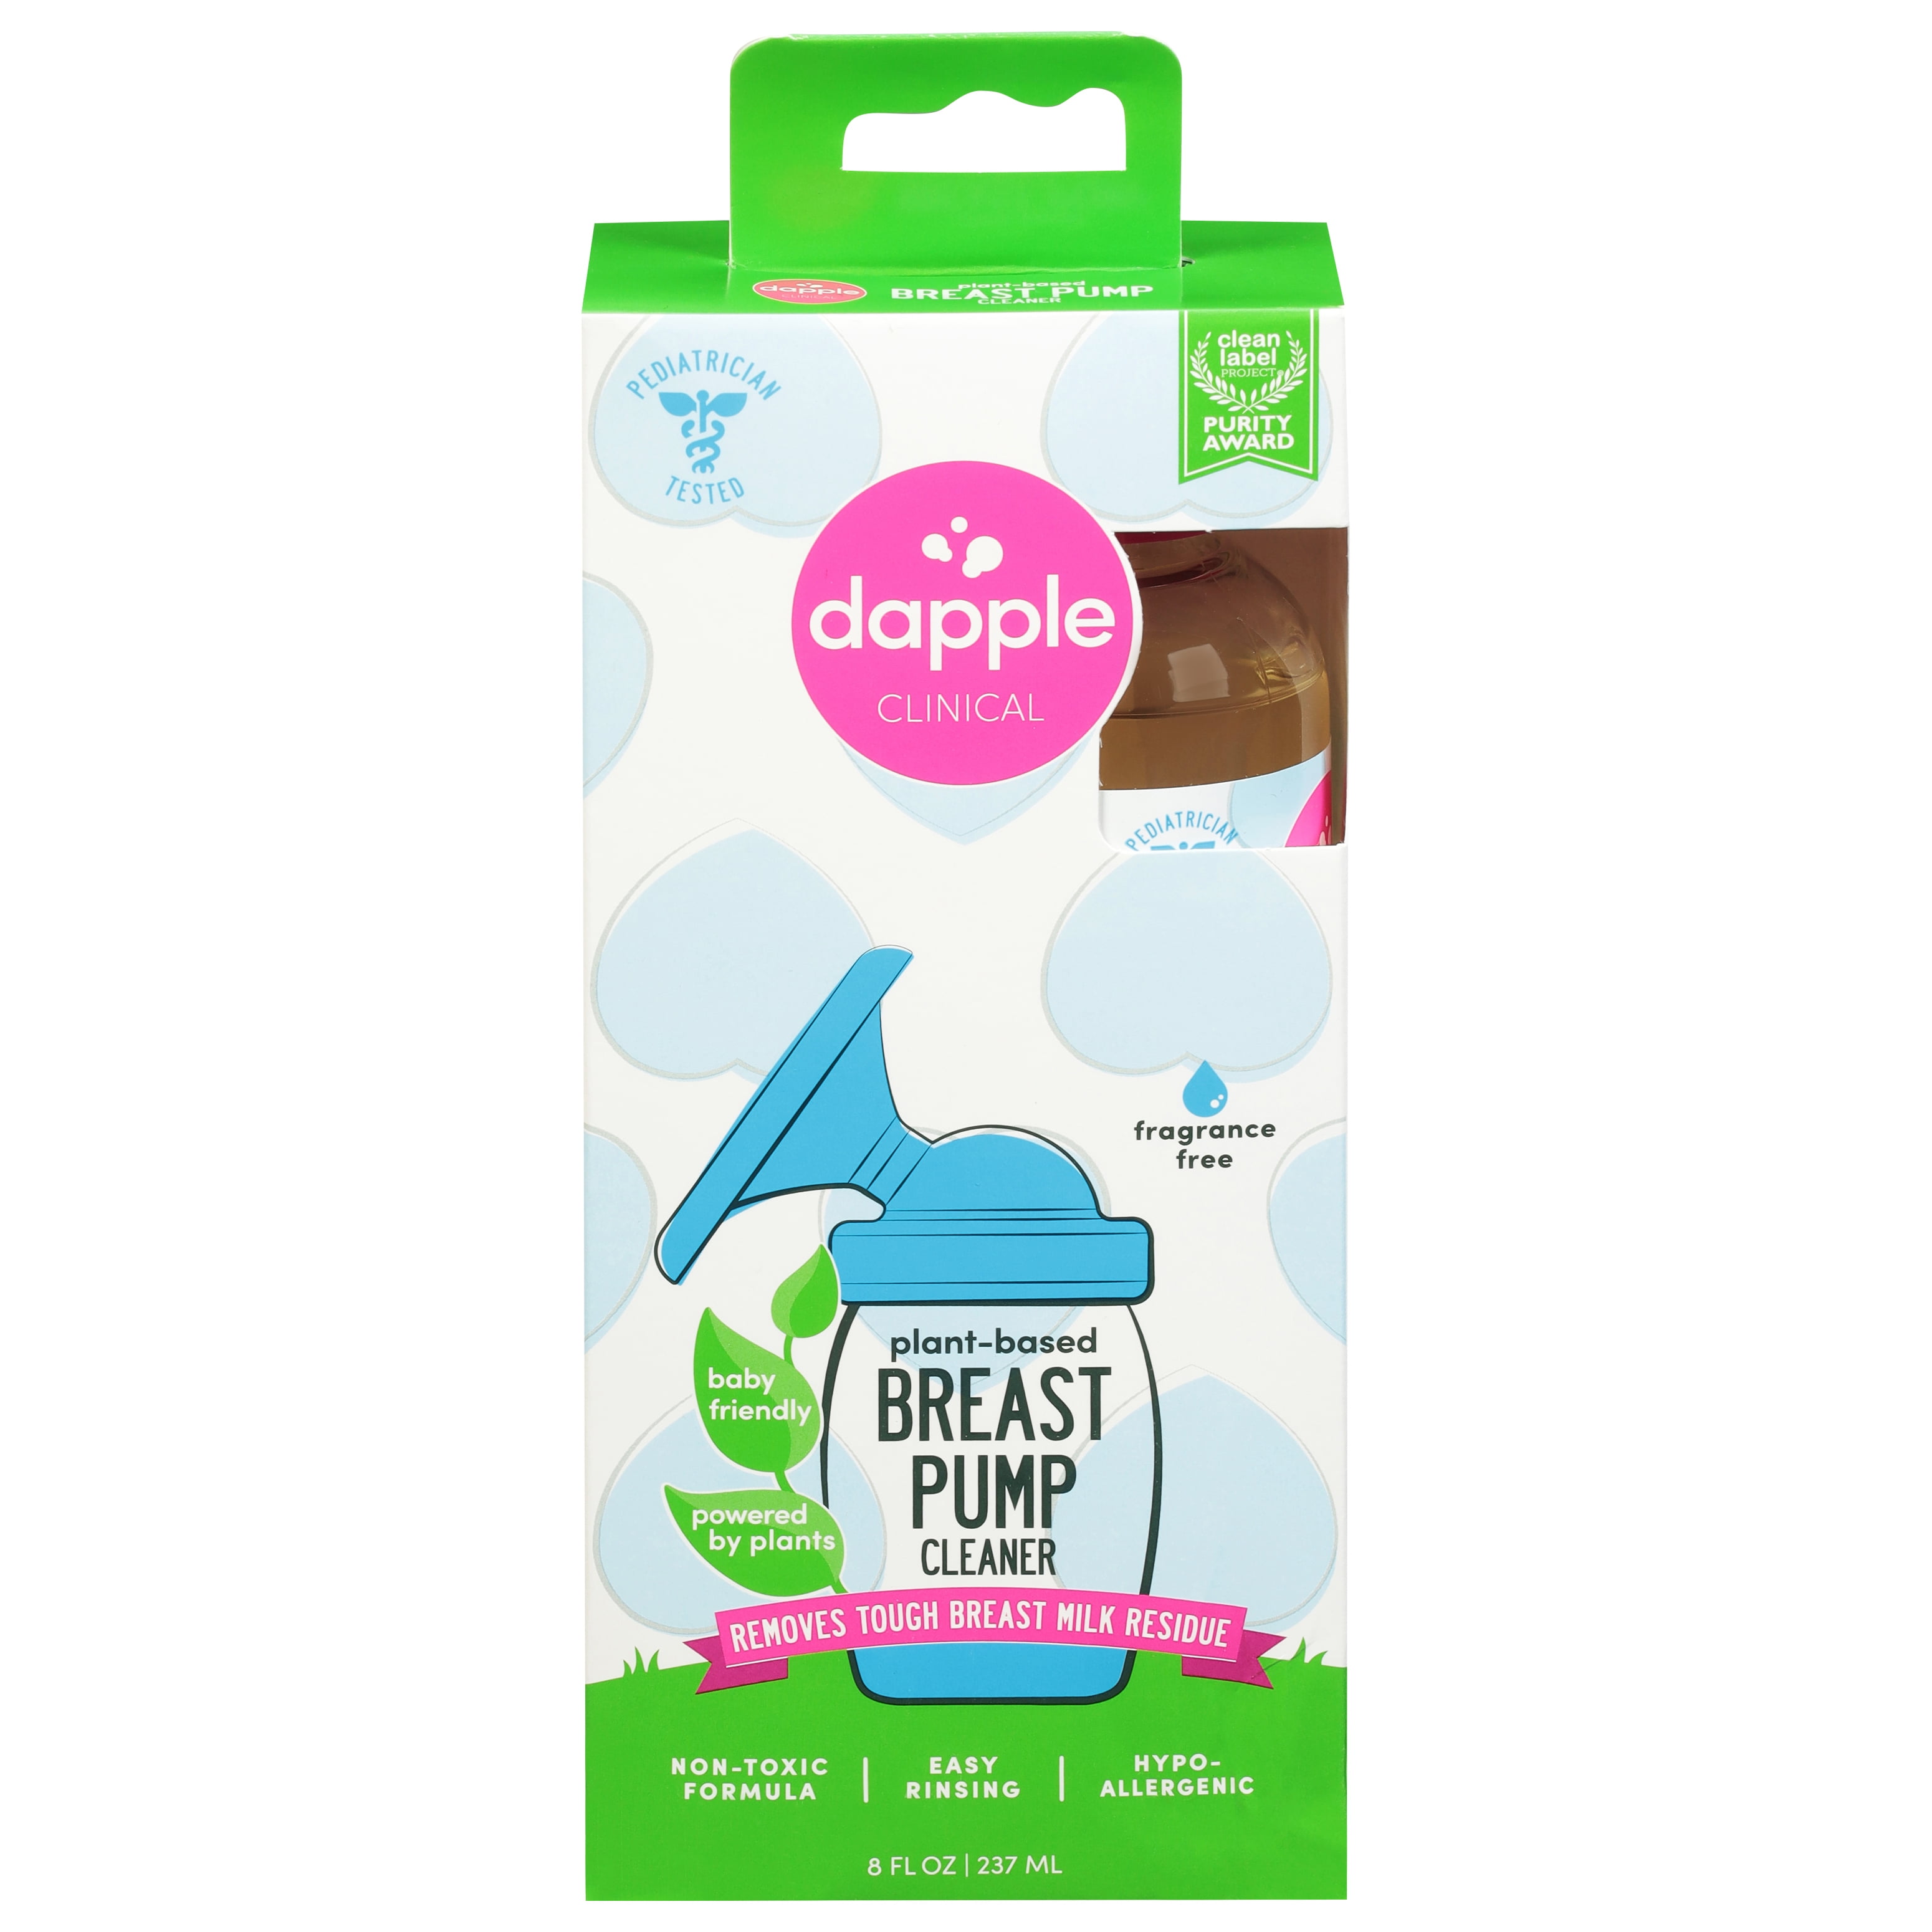 Dapple Baby Breast Pump Cleaner Wipes, Fragrance Free, 25 Count (Pack of 2)  - Travel Breast Pump Cleaning Wipes Made in The USA